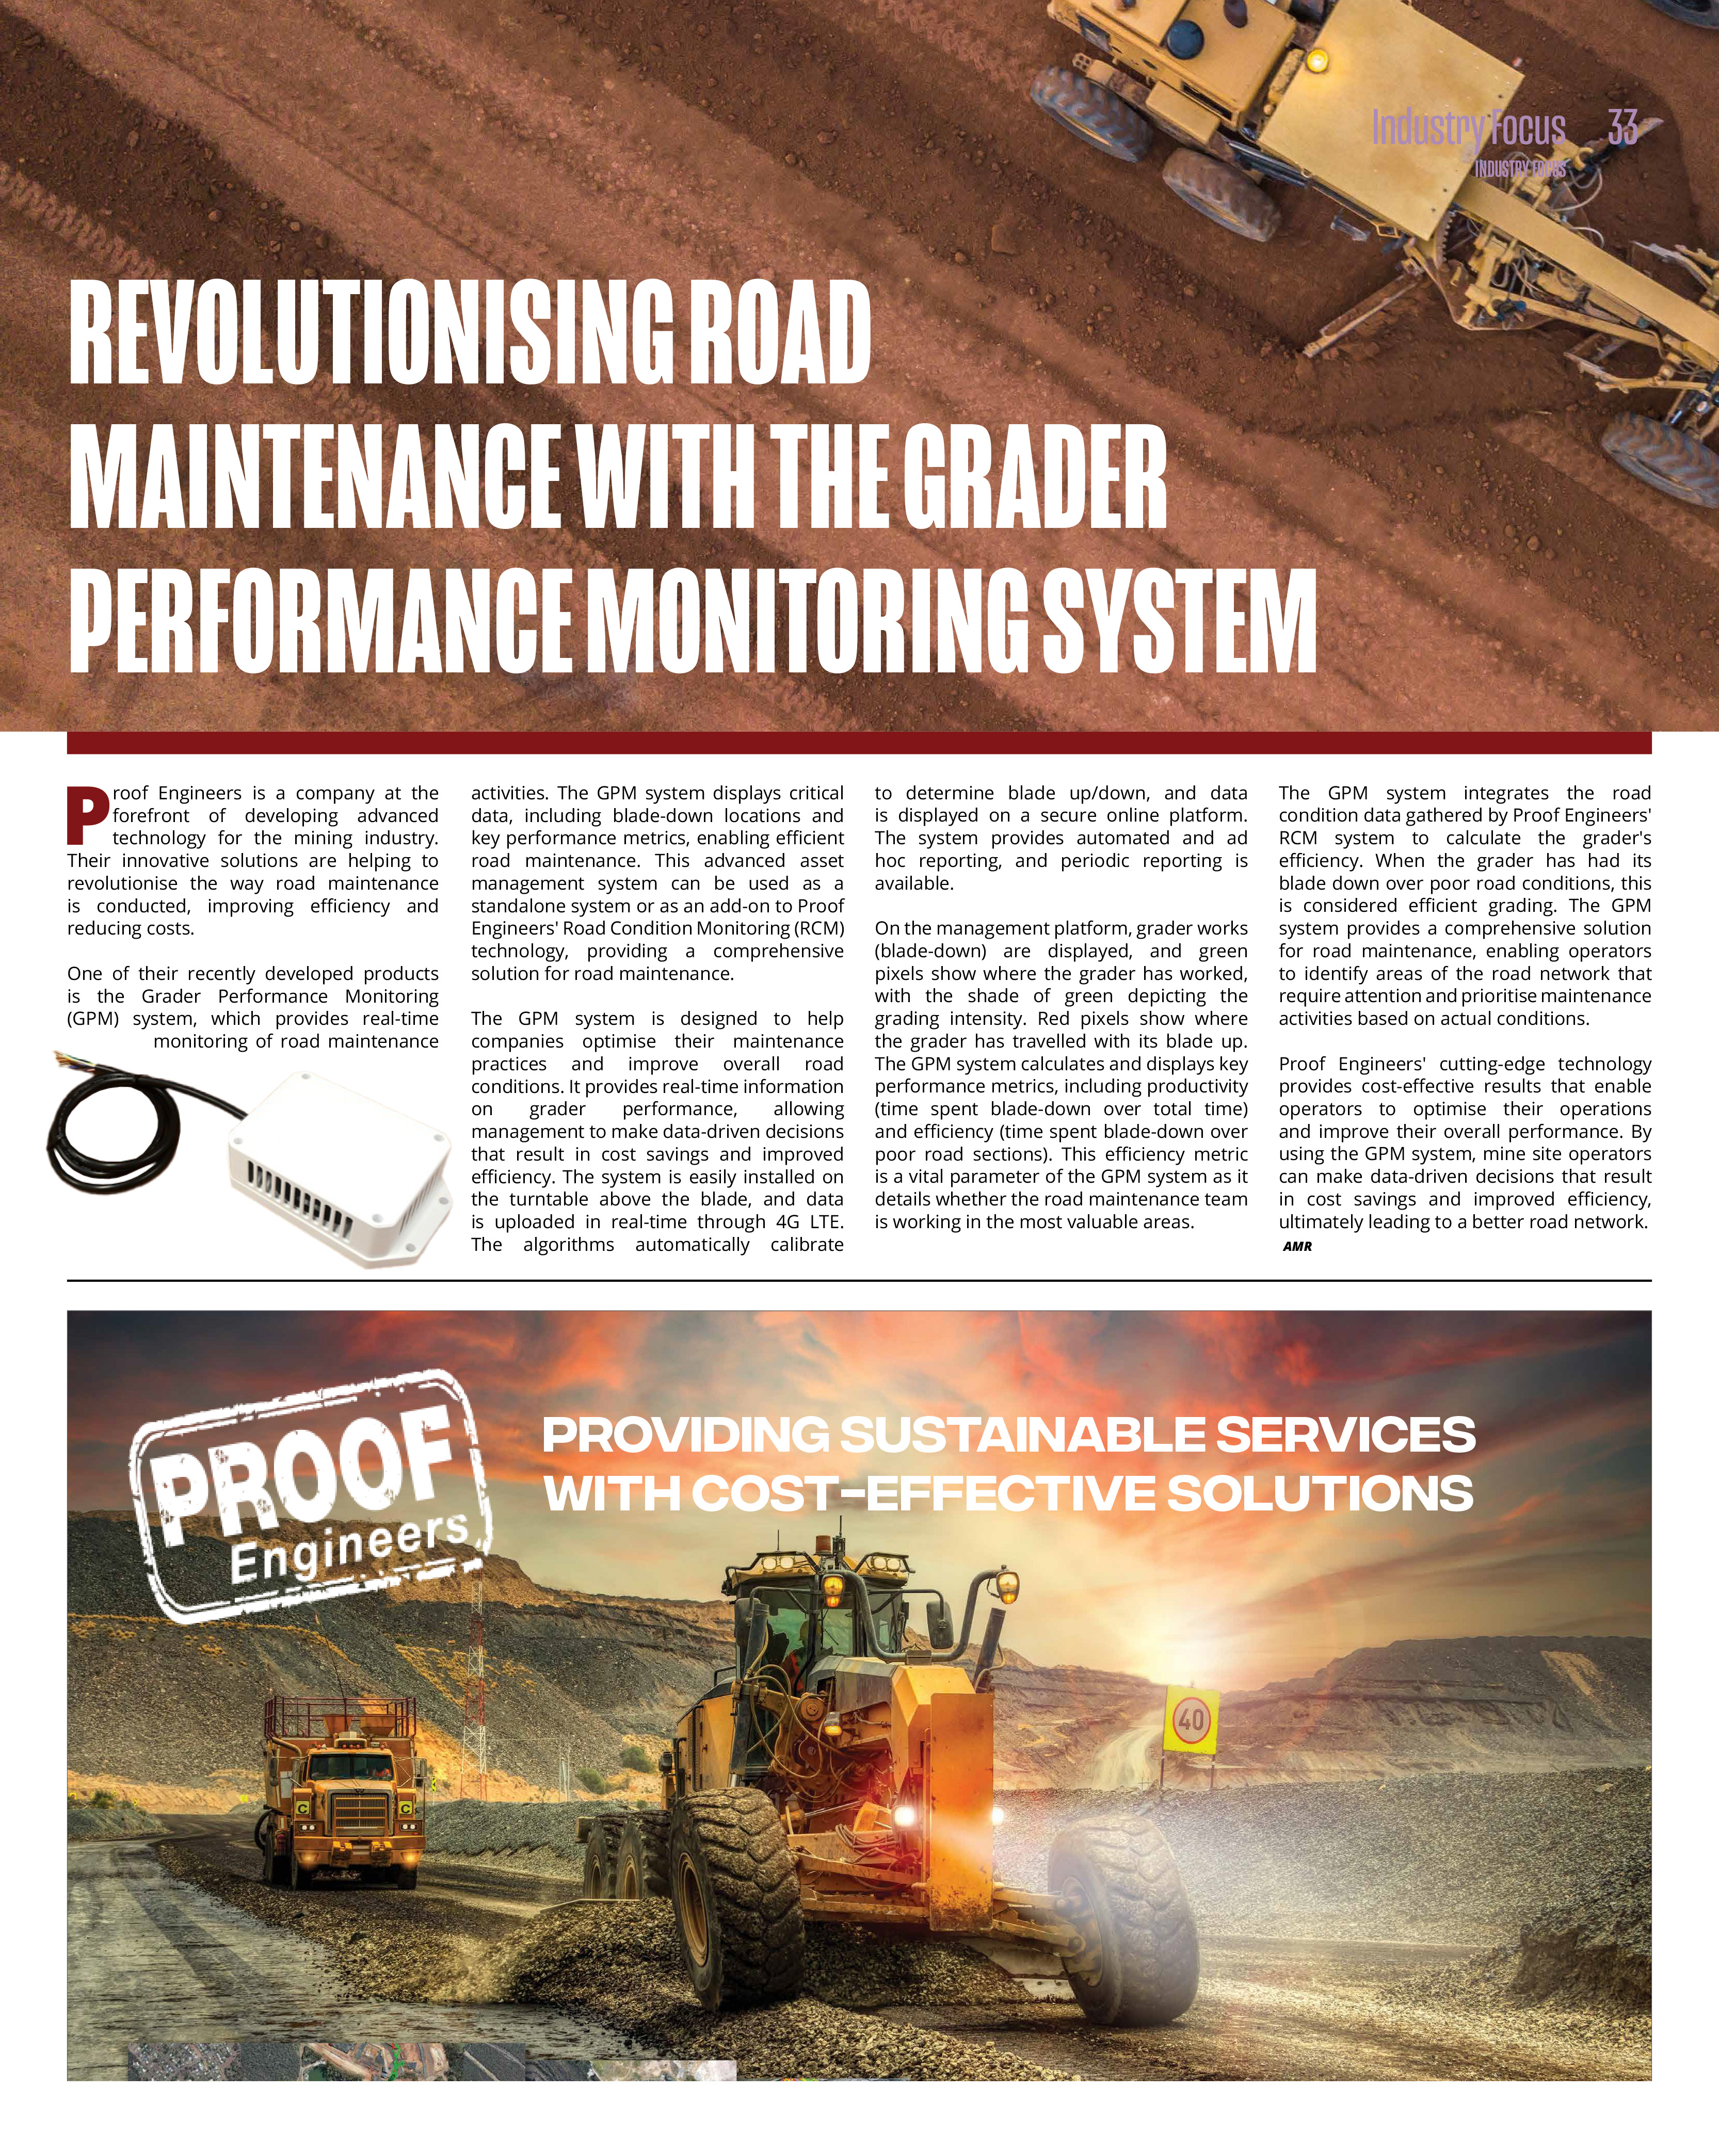 Revolutionising Road Maintenance with the Grader Performance Monitoring System